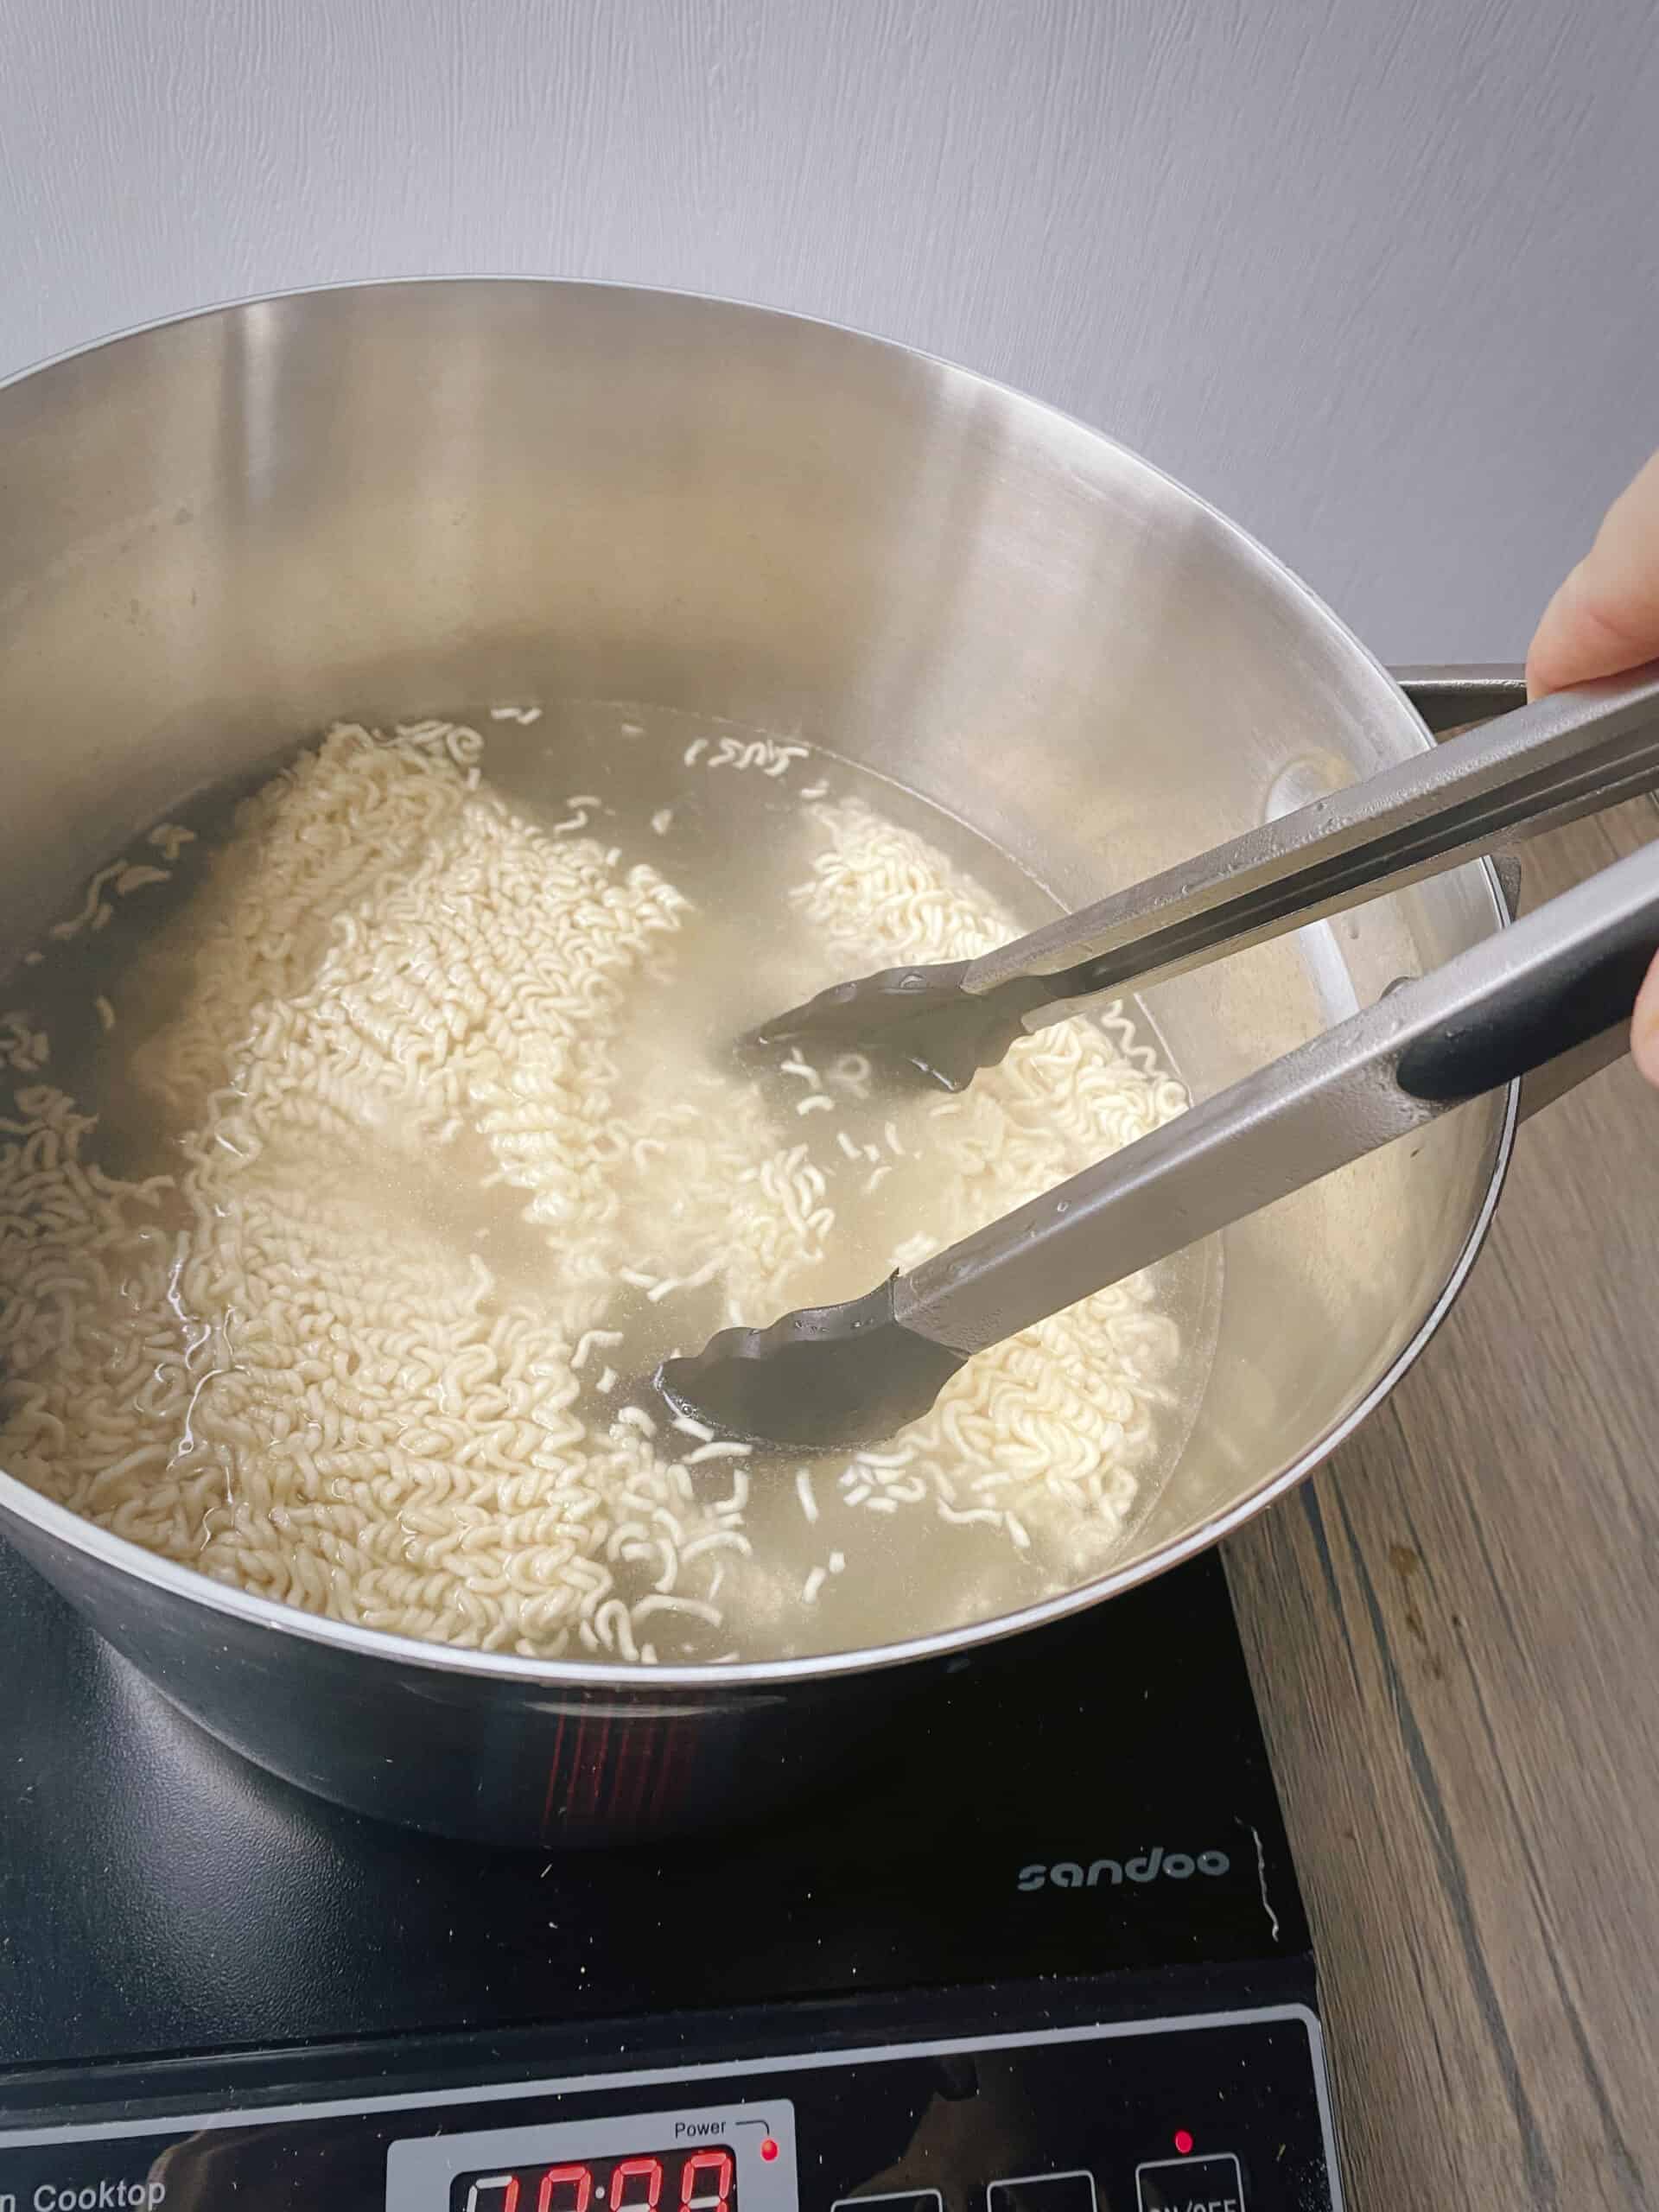 tongs stirring the ramen noodles in the boiling water as they cook.